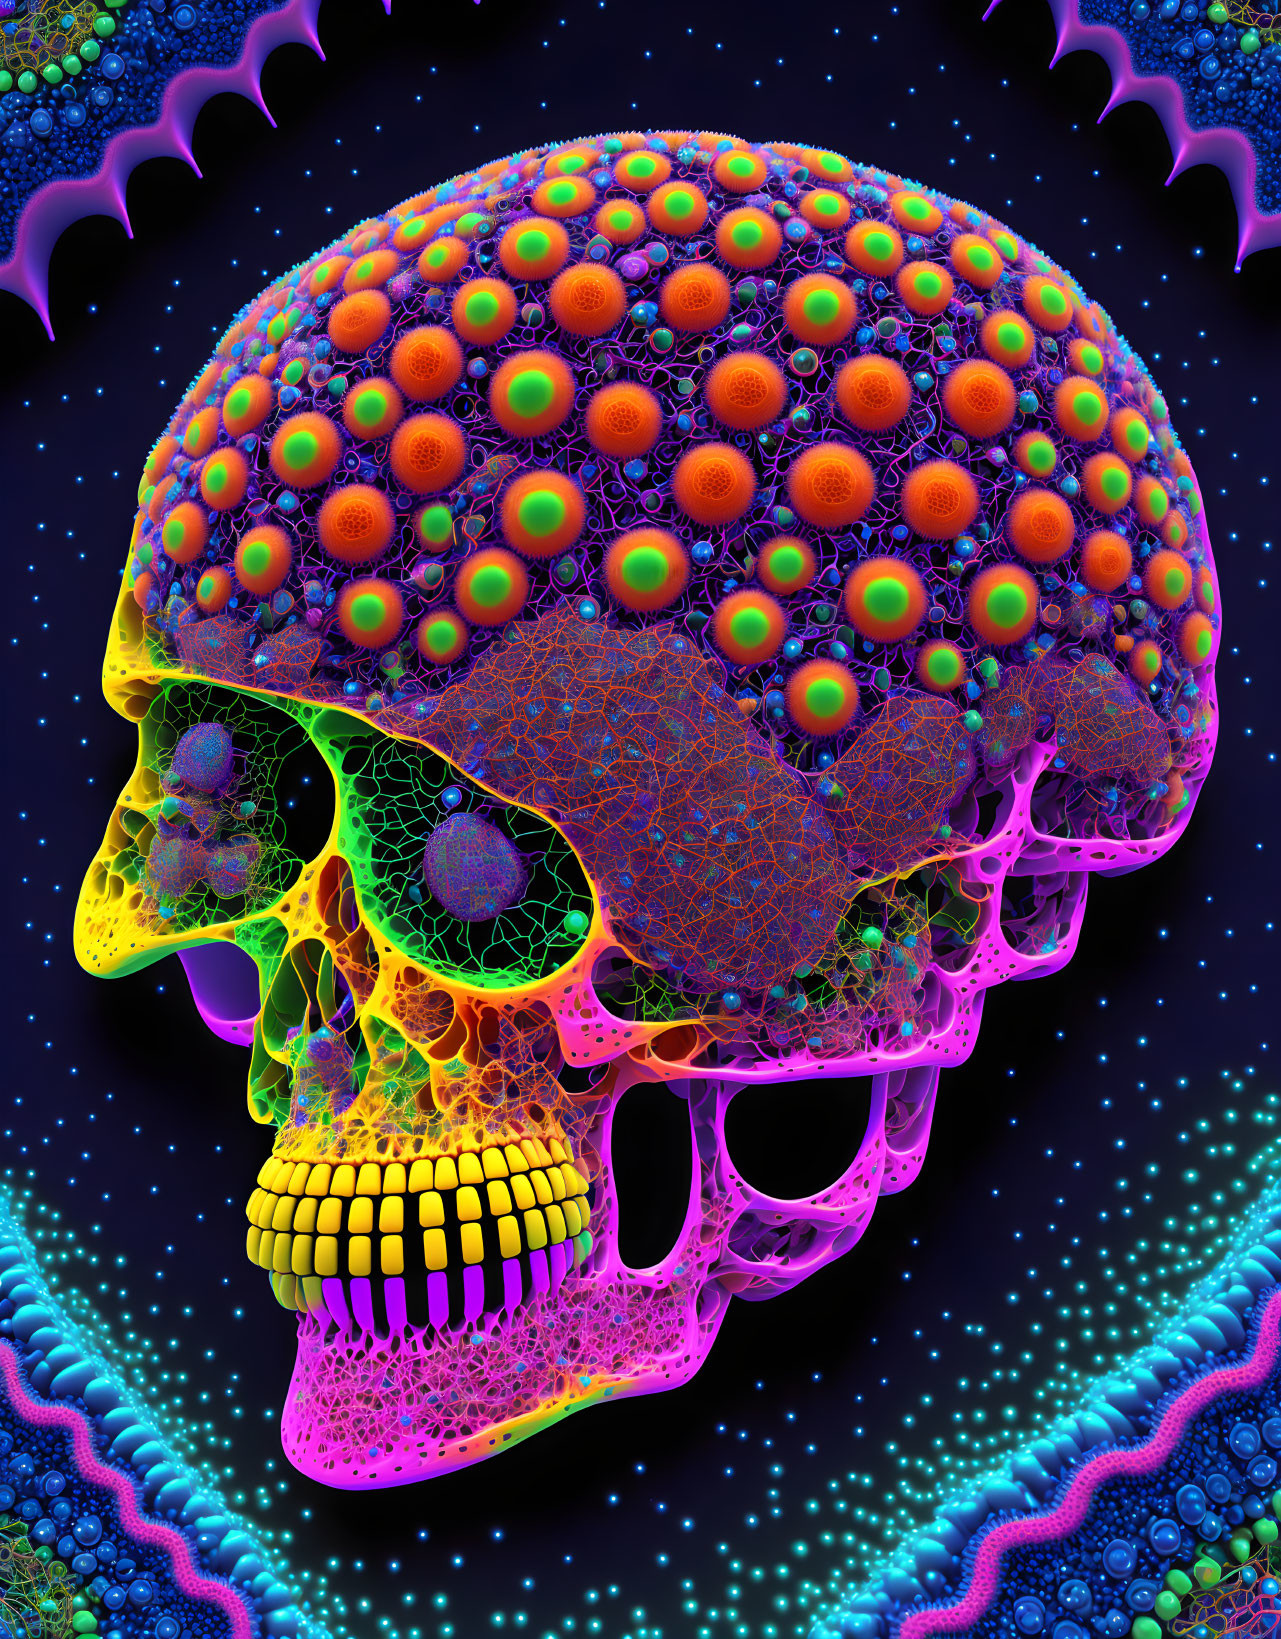 Colorful Psychedelic Human Skull Illustration with Neon Patterns on Dark Starry Background